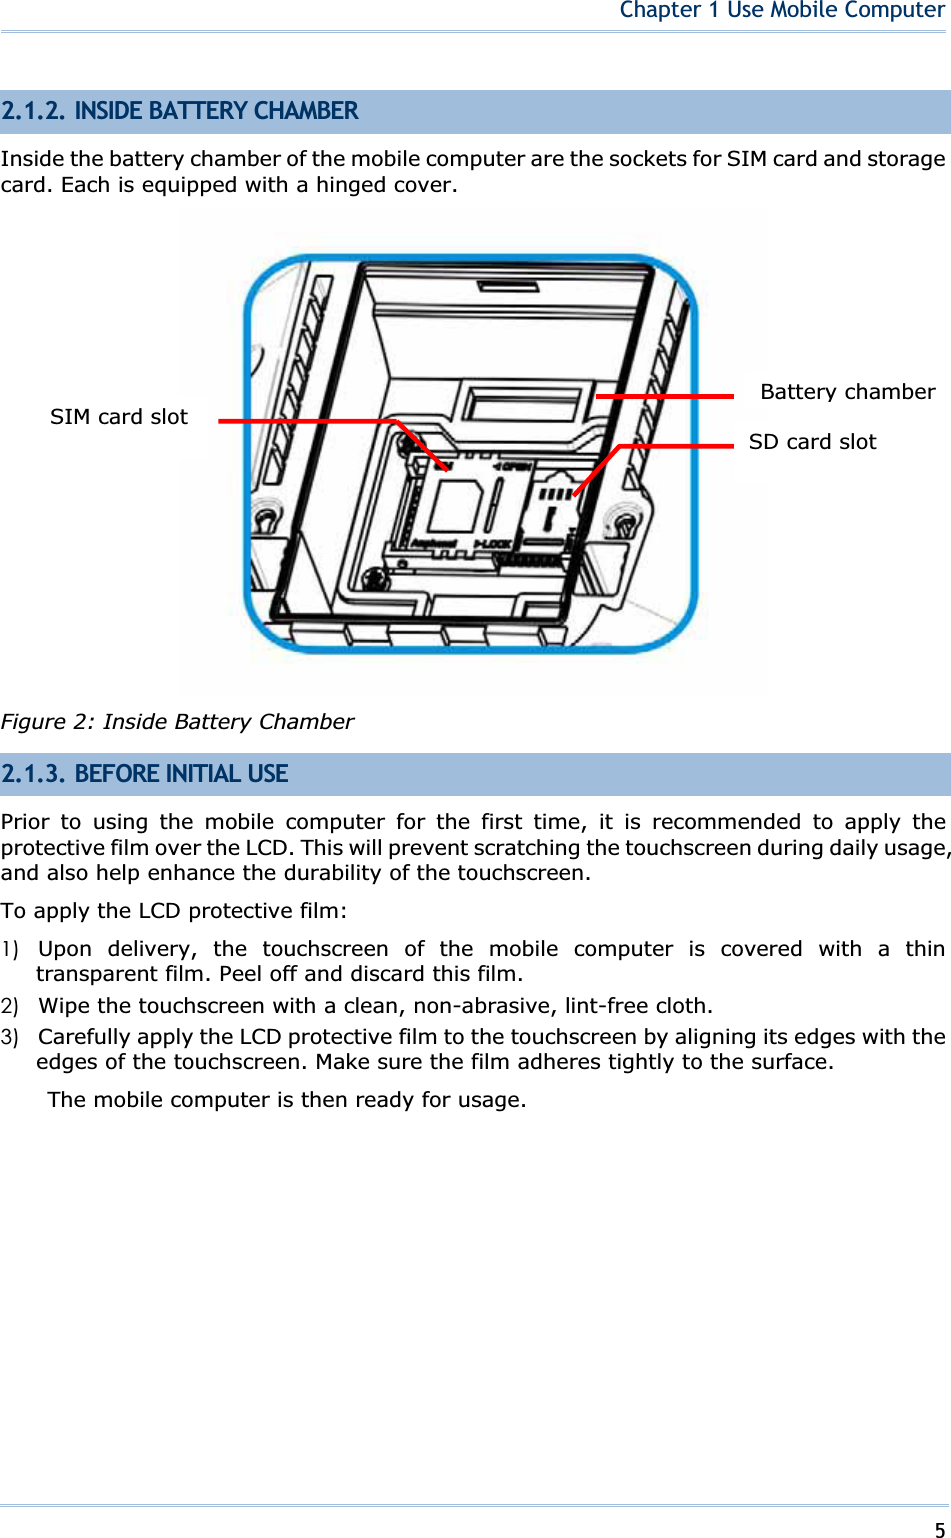 5Chapter 1 Use Mobile Computer2.1.2. INSIDE BATTERY CHAMBER Inside the battery chamber of the mobile computer are the sockets for SIM card and storage card. Each is equipped with a hinged cover. Figure 2: Inside Battery Chamber 2.1.3. BEFORE INITIAL USE Prior to using the mobile computer for the first time, it is recommended to apply the protective film over the LCD. This will prevent scratching the touchscreen during daily usage, and also help enhance the durability of the touchscreen. To apply the LCD protective film: 1) Upon delivery, the touchscreen of the mobile computer is covered with a thin transparent film. Peel off and discard this film. 2) Wipe the touchscreen with a clean, non-abrasive, lint-free cloth. 3) Carefully apply the LCD protective film to the touchscreen by aligning its edges with the edges of the touchscreen. Make sure the film adheres tightly to the surface. The mobile computer is then ready for usage. SD card slot SIM card slot Battery chamber